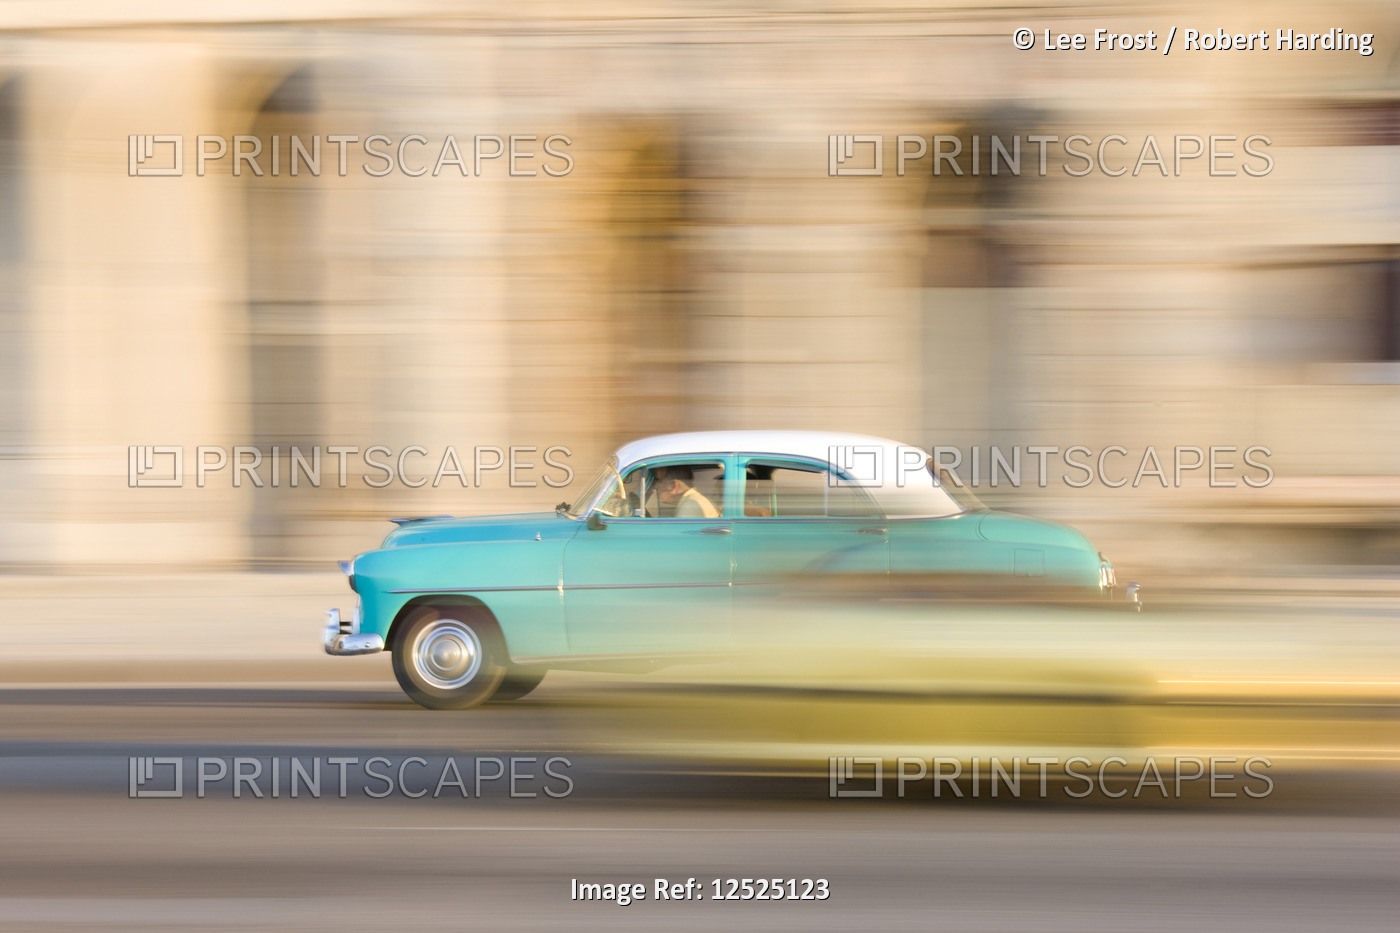 Panned shot of a classic American car on The Malecon, Havana, Cuba